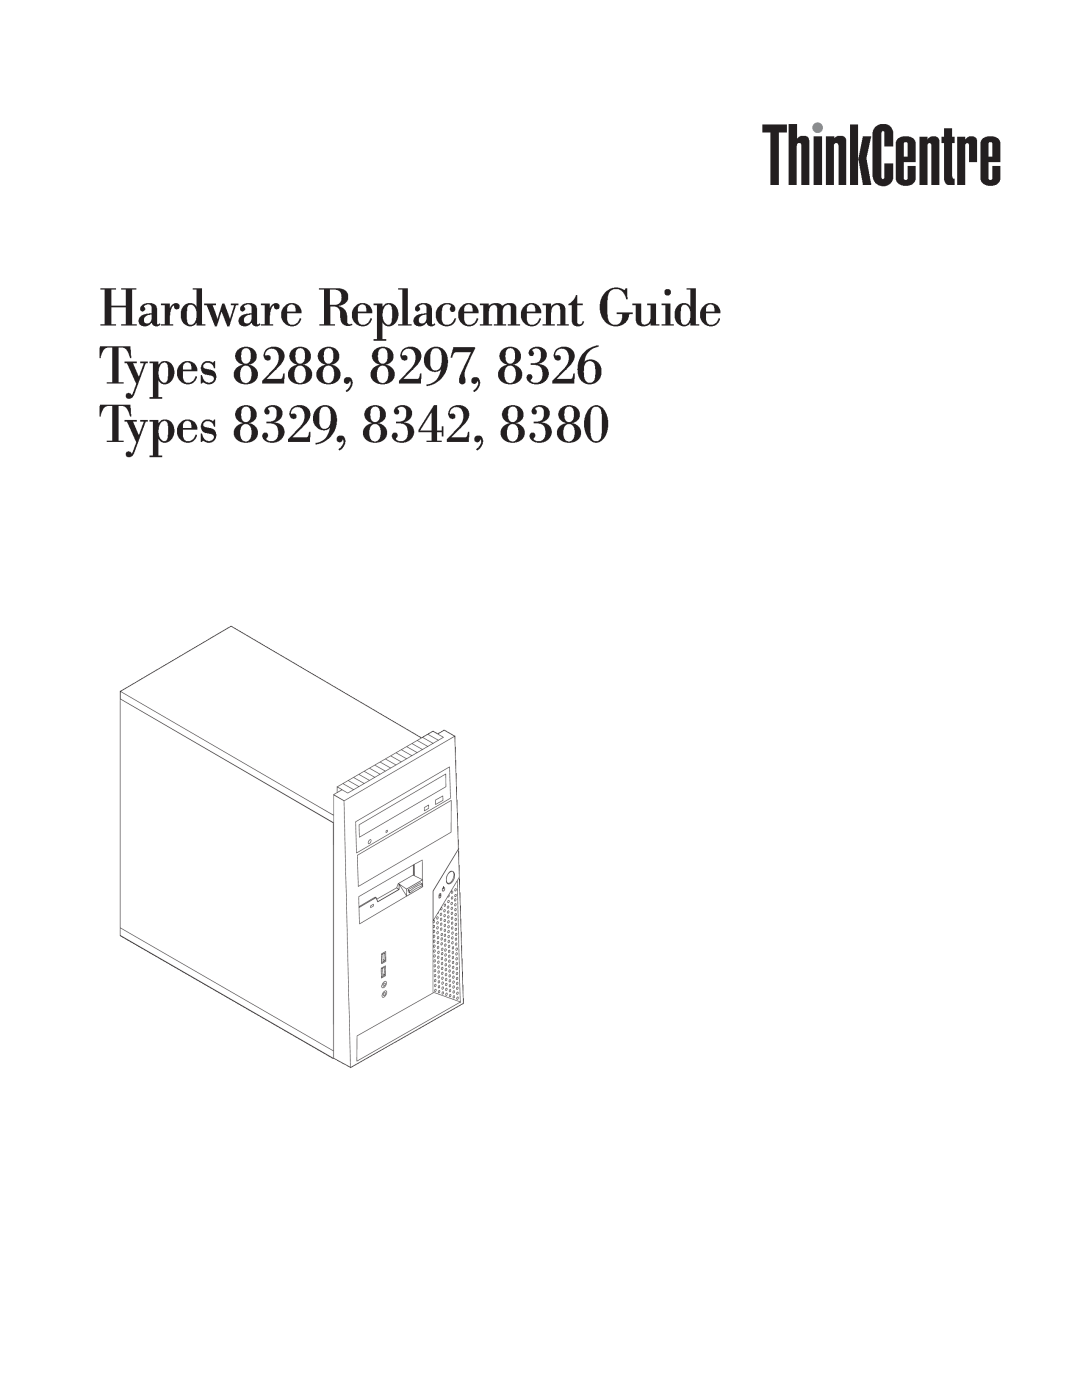 Lenovo Types 8297, Types 8329, Types 8288, Types 8342, Types 8380, Types 8326 manual Hardware Replacement Guide Types 